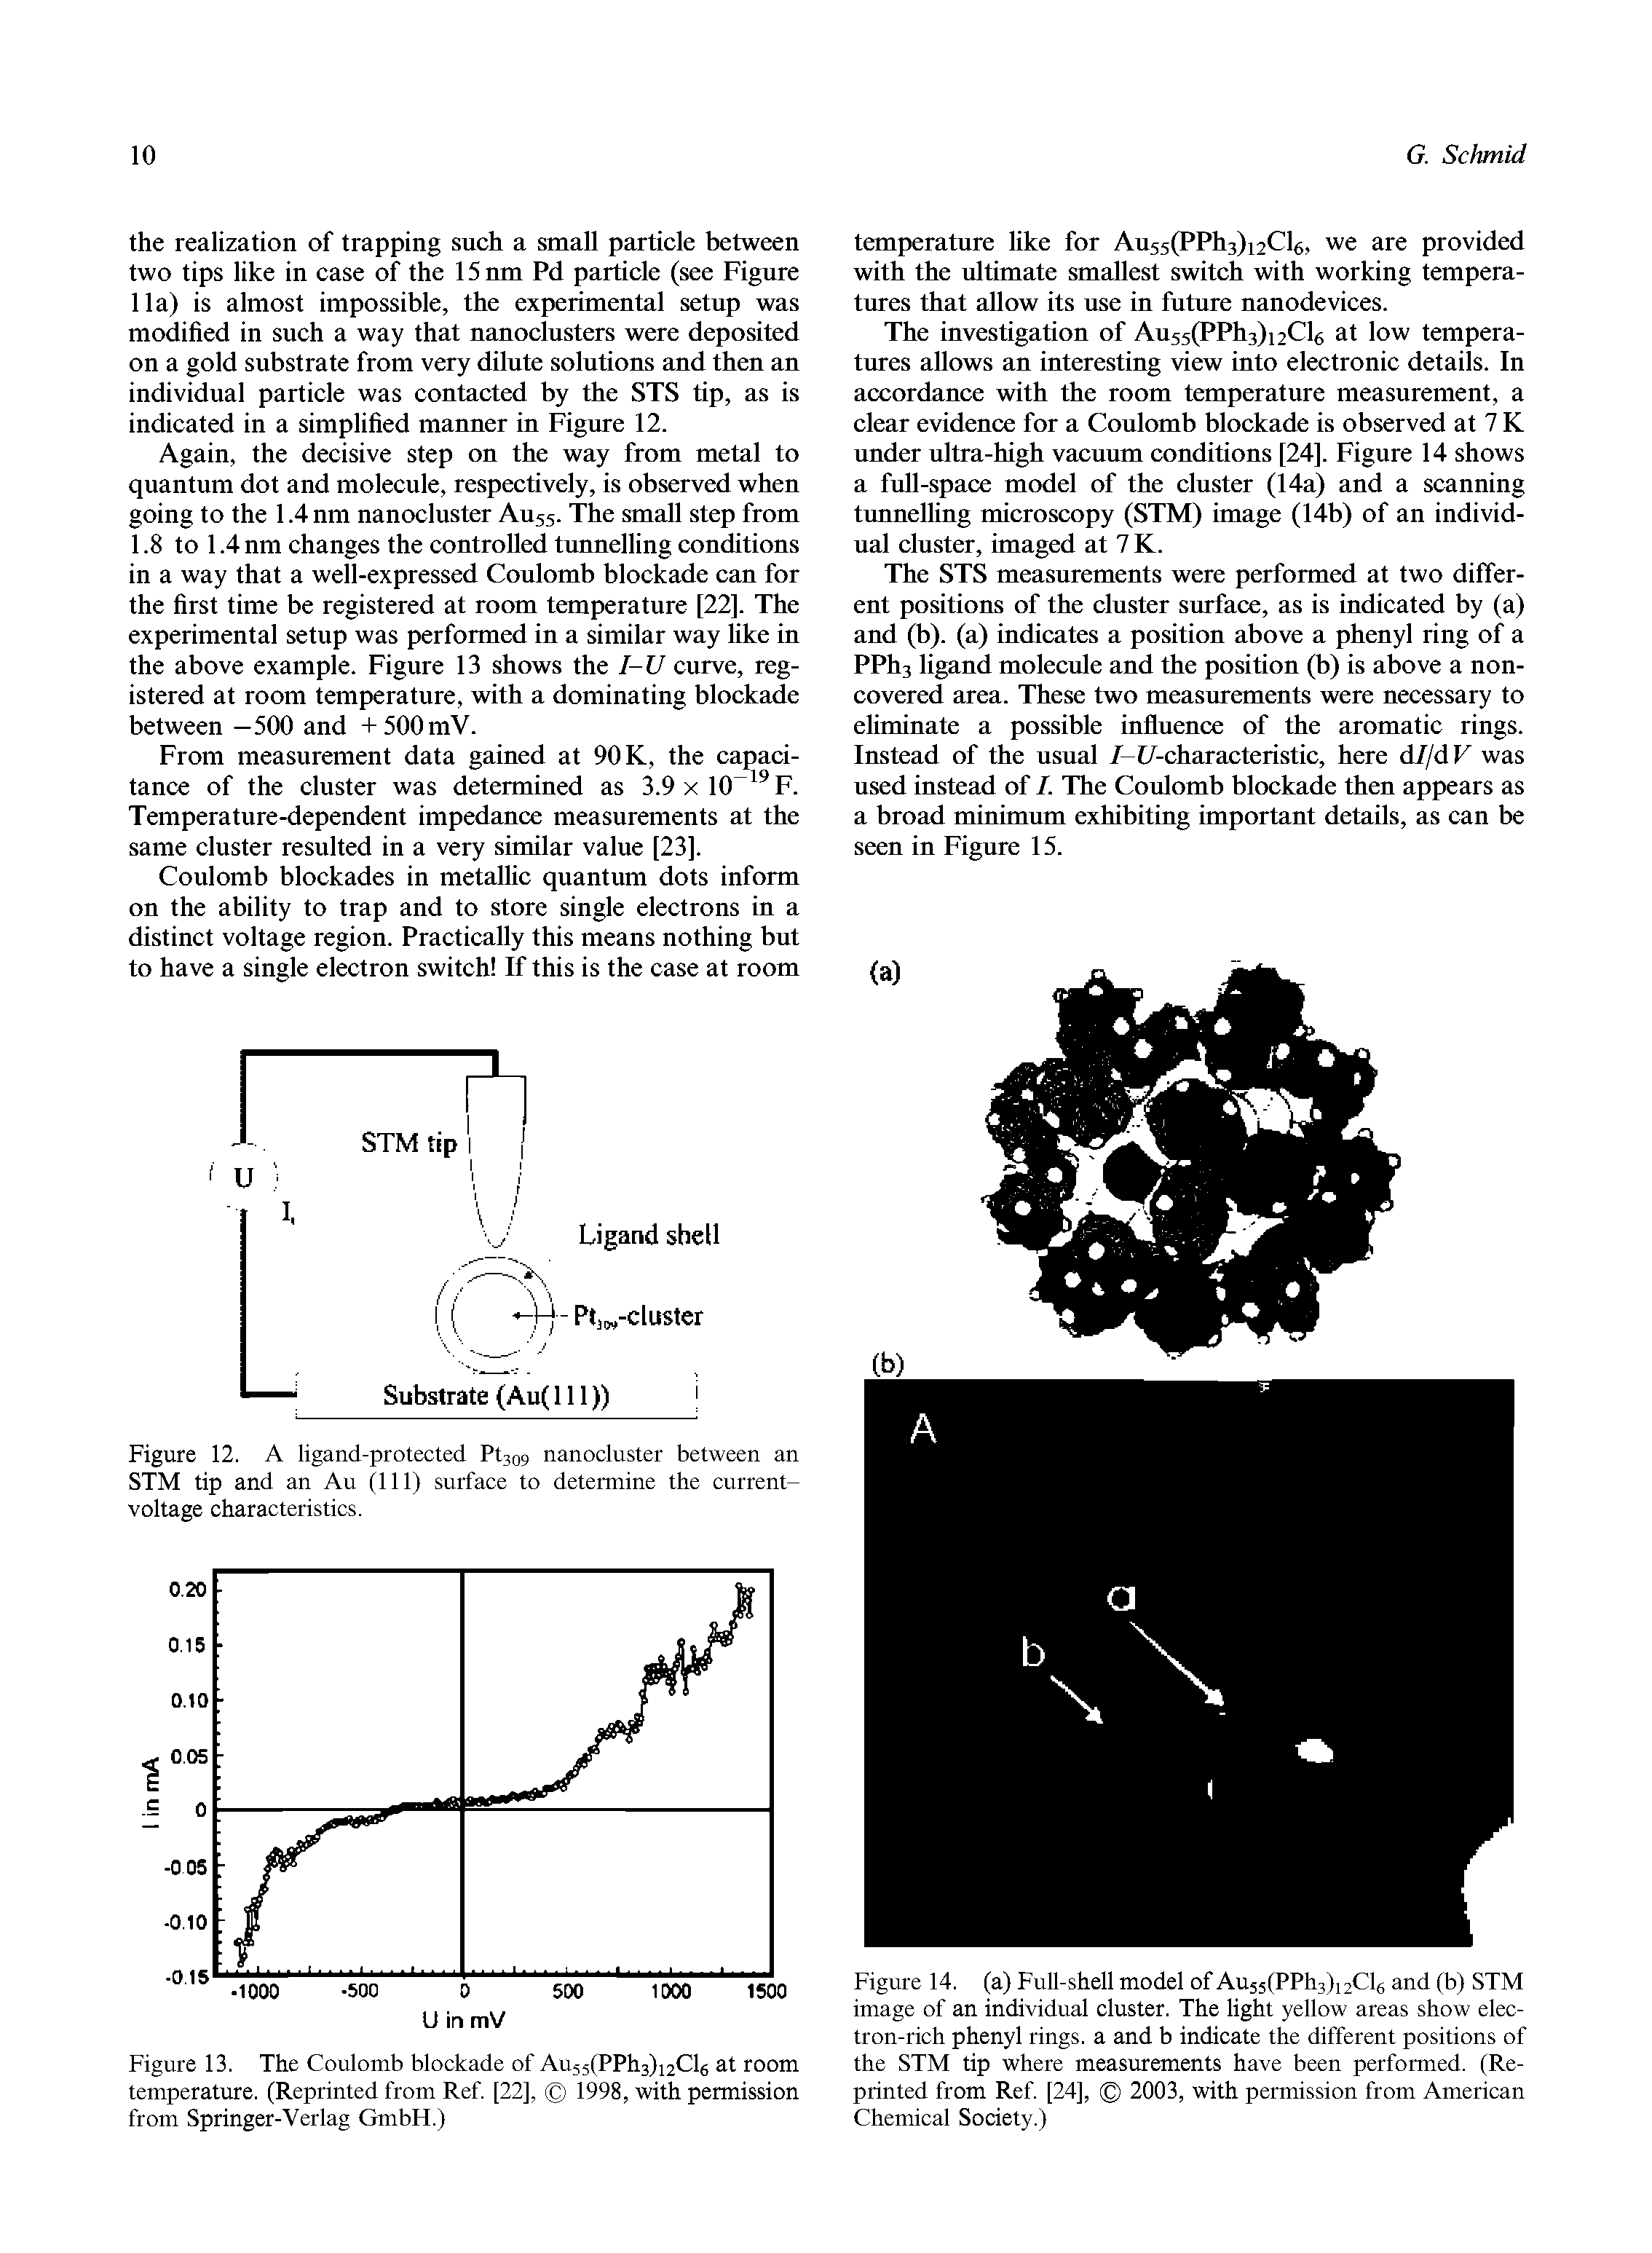 Figure 13. The Coulomb blockade of Au55(PPh3)i2Cl6 at room temperature. (Reprinted from Ref [22], 1998, with permission from Springer-Verlag GmbH.)...